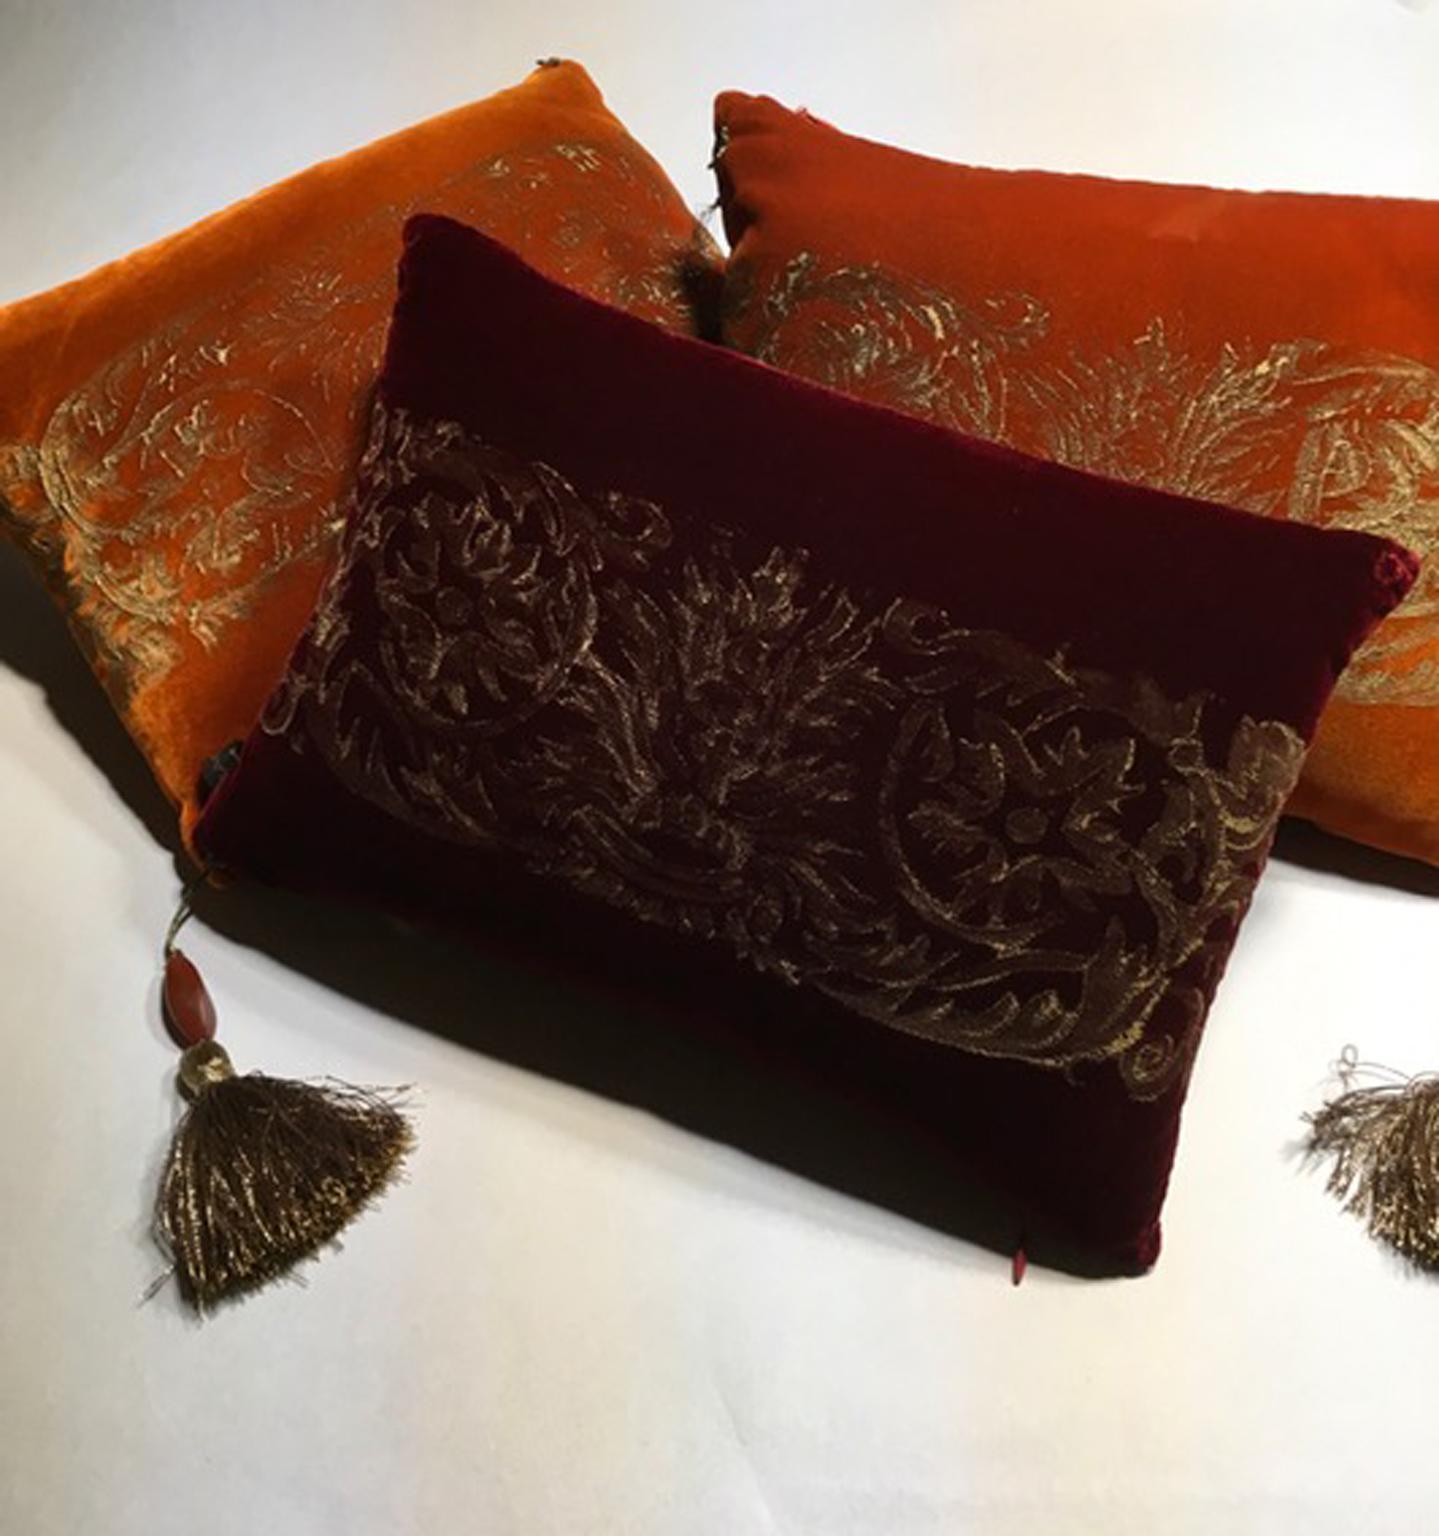 Italian Fortuny Venice Style Set Three Orange Silk Pillows in Golden Color Hand Printed